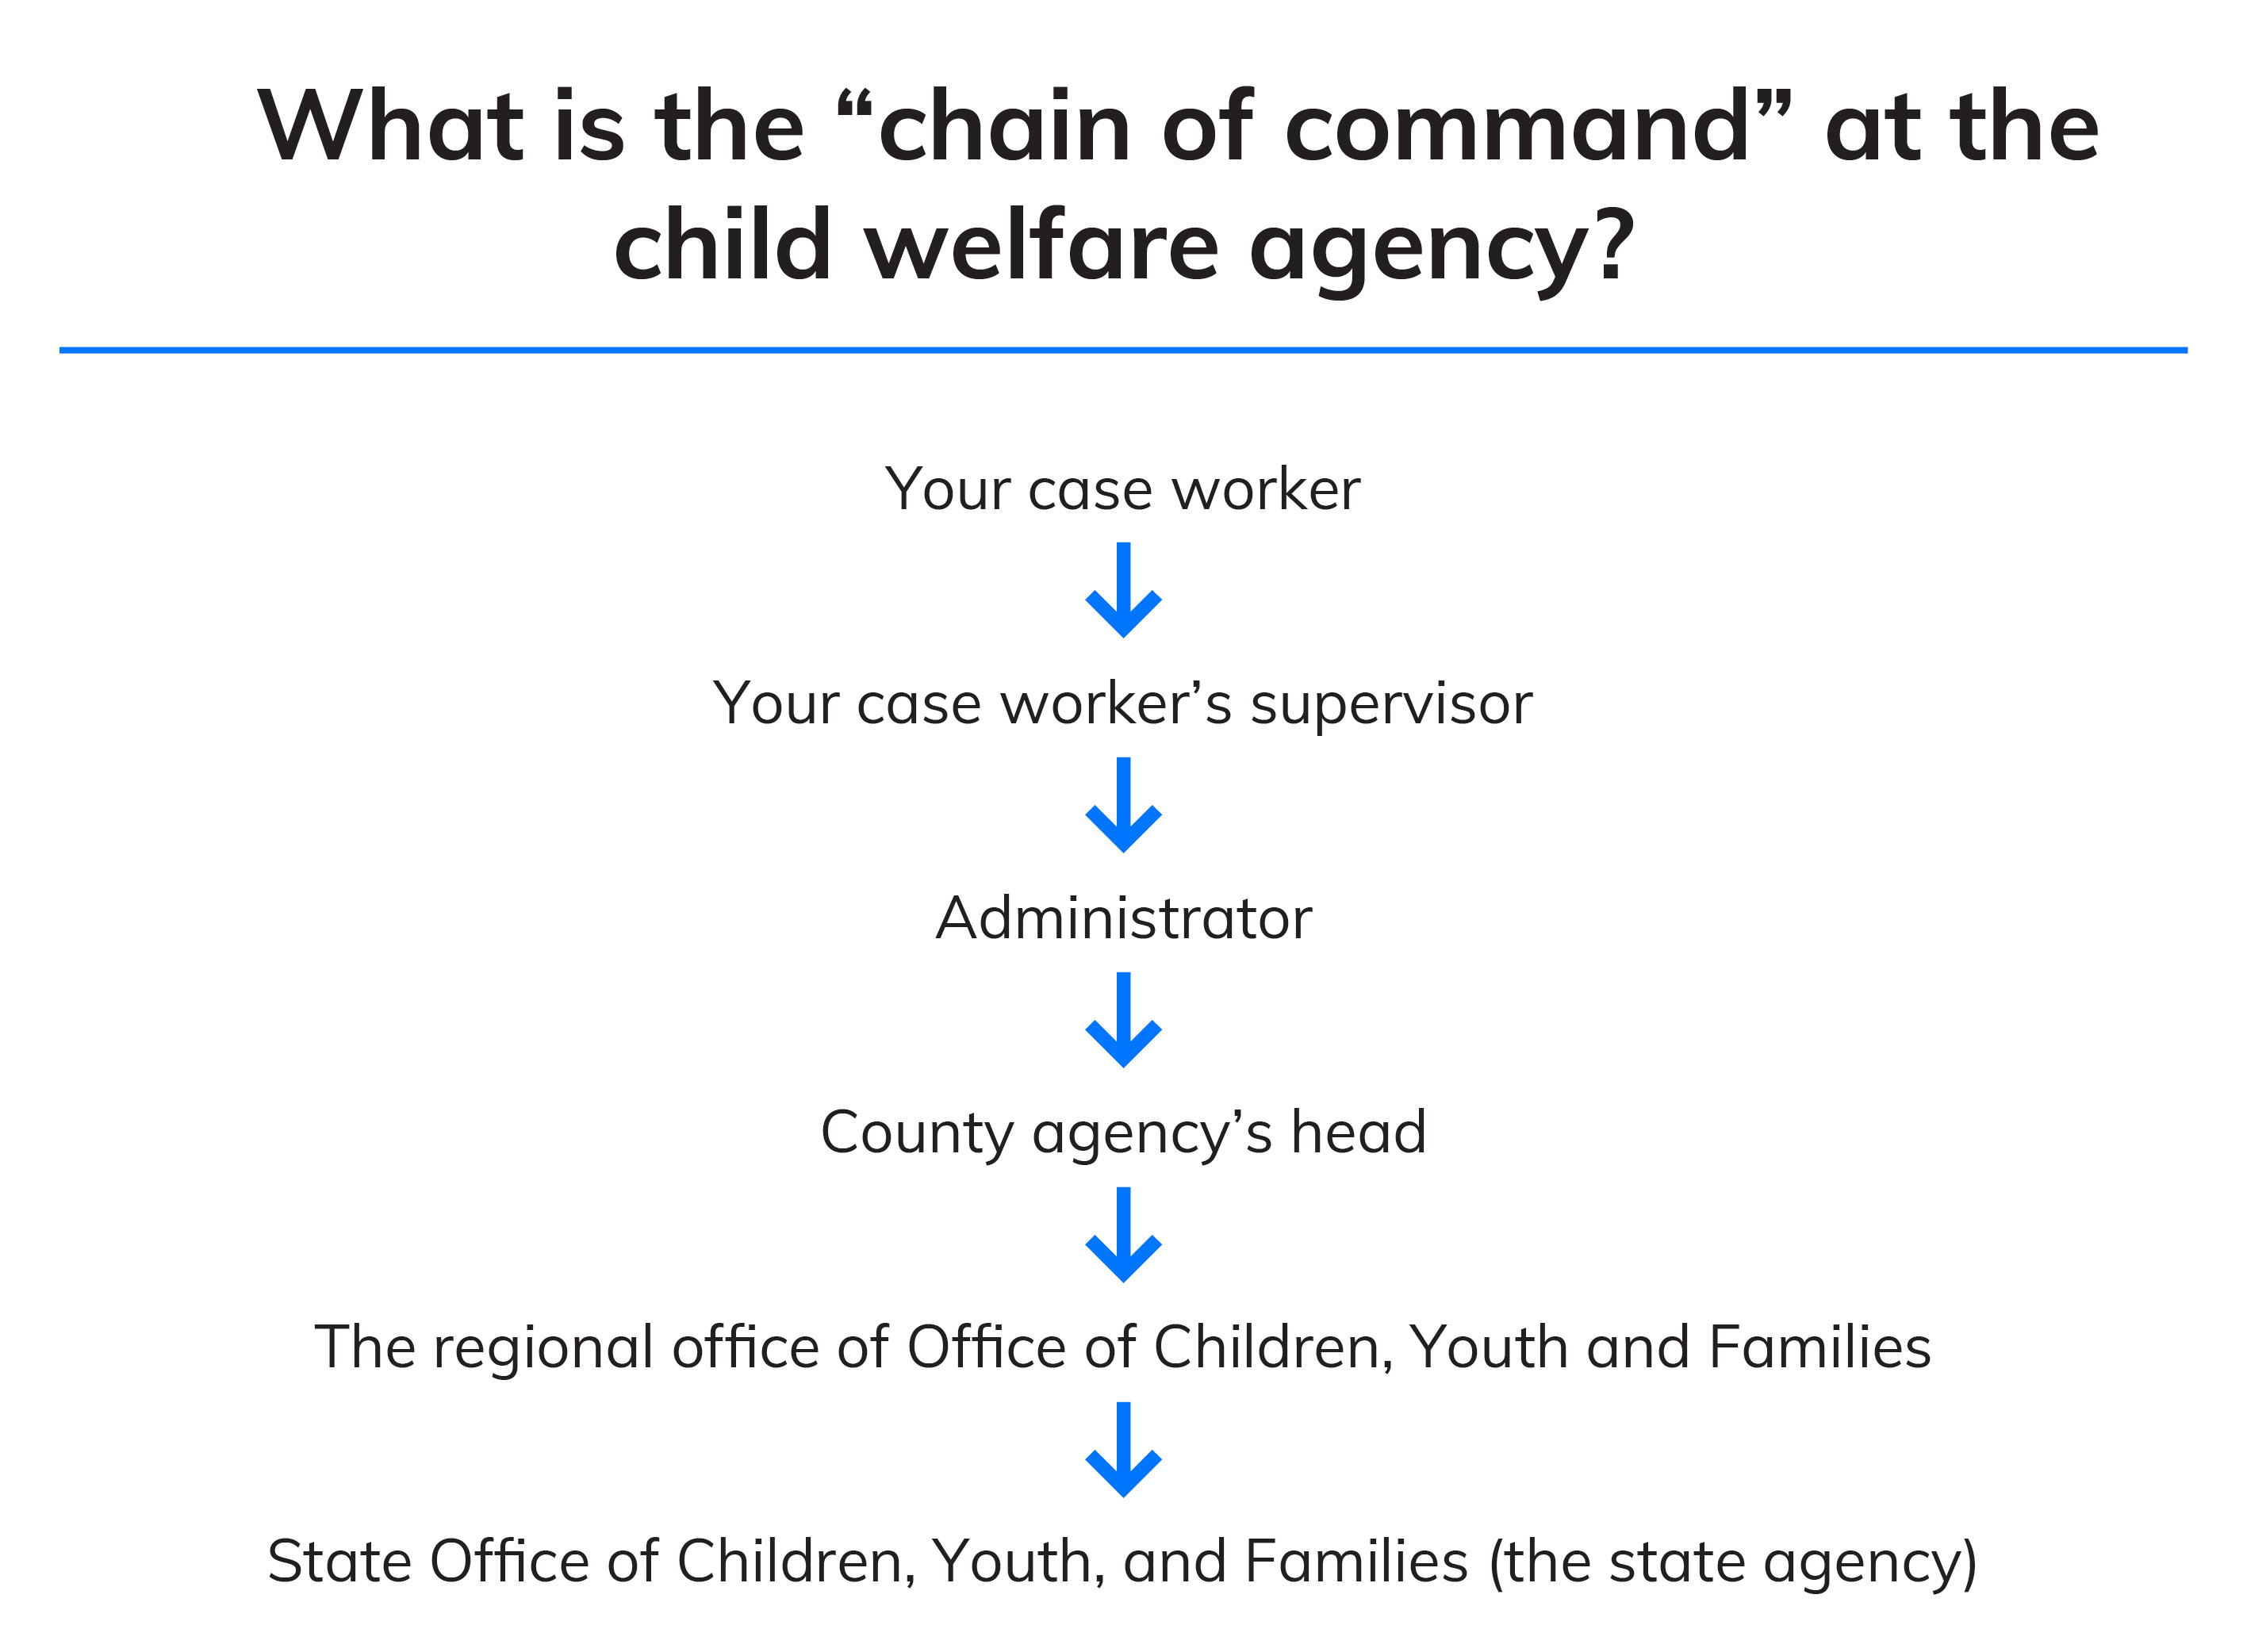 Chart showing increasing chain of command from case worker to case worker's supervisor to administrator to county agency's head to regional office of the Office of Children, Youth, and Families to State Office of the Office of Children, Youth, and Families